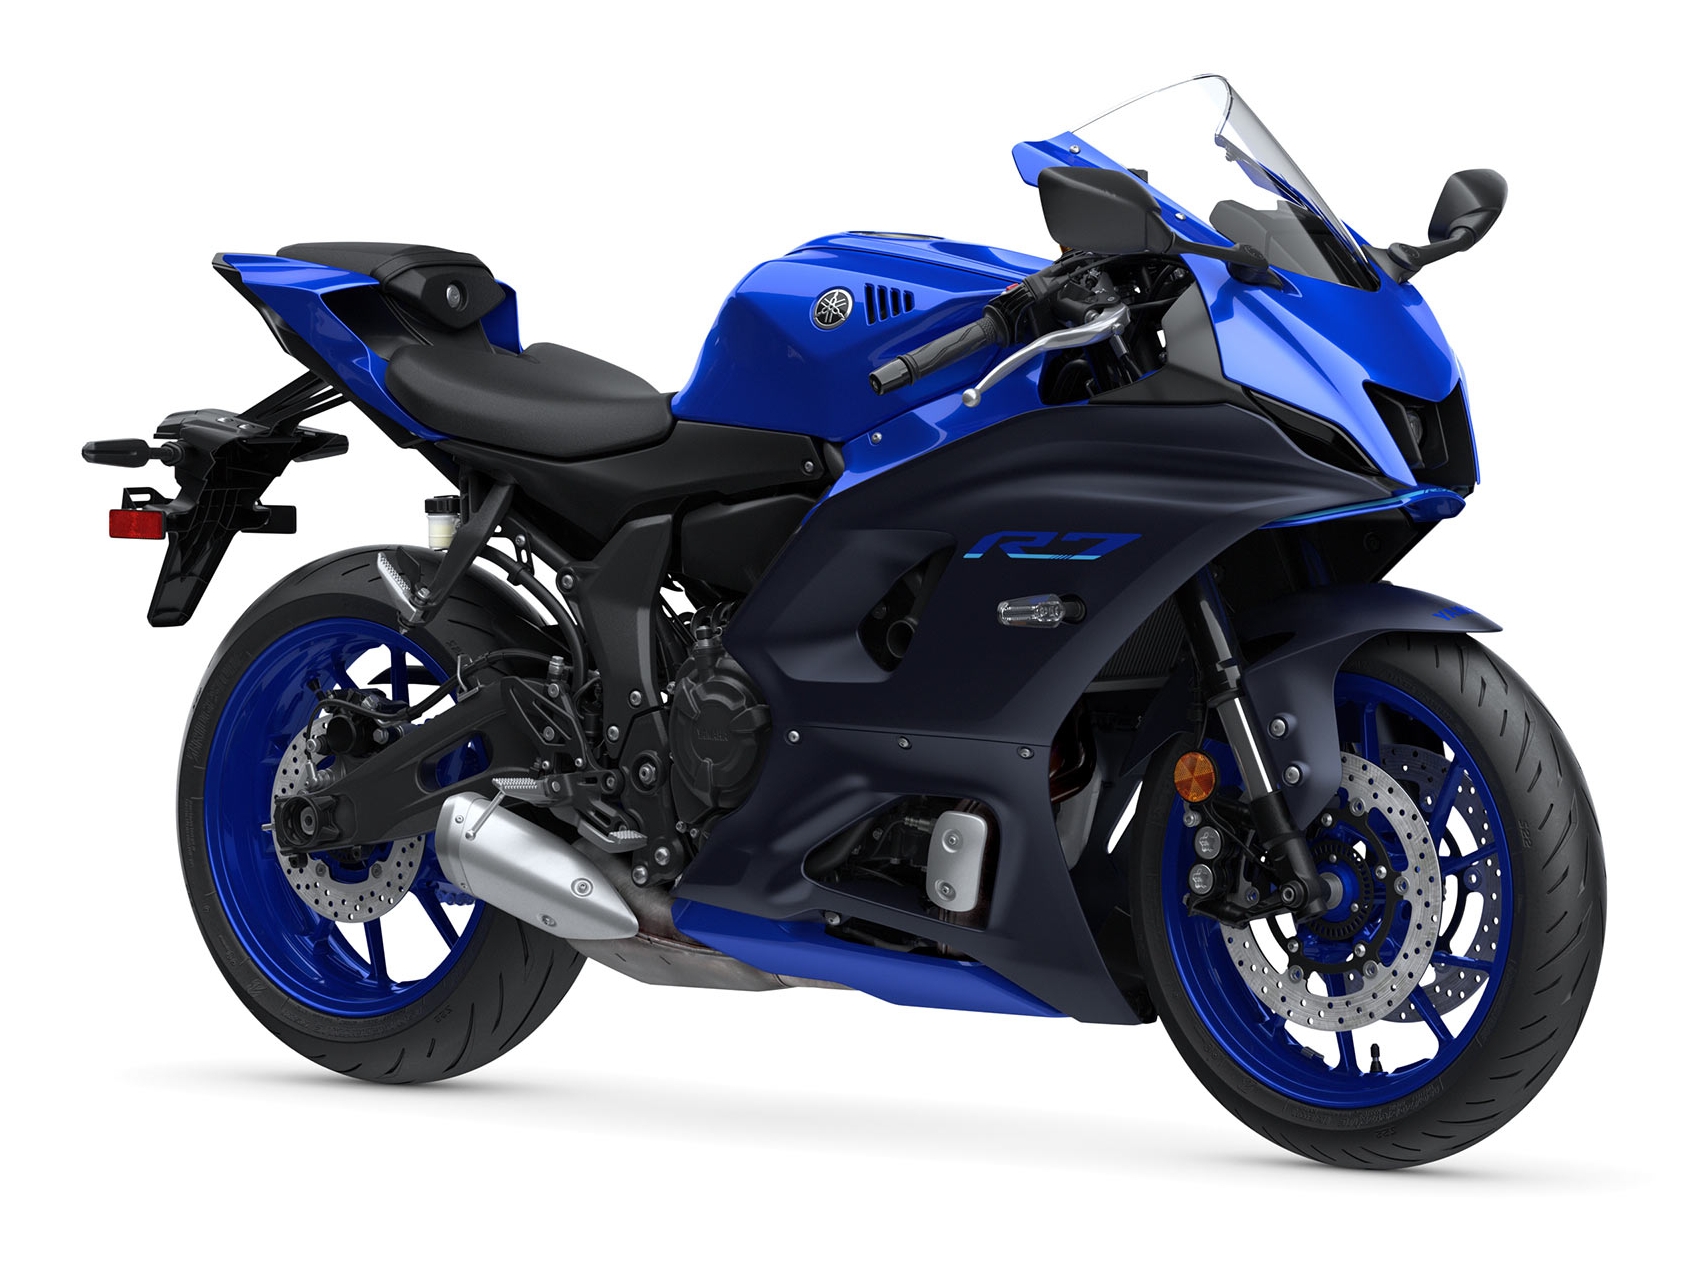 2022 Yamaha YZF-R7 Buyer's Guide: Specs, Photos, Price